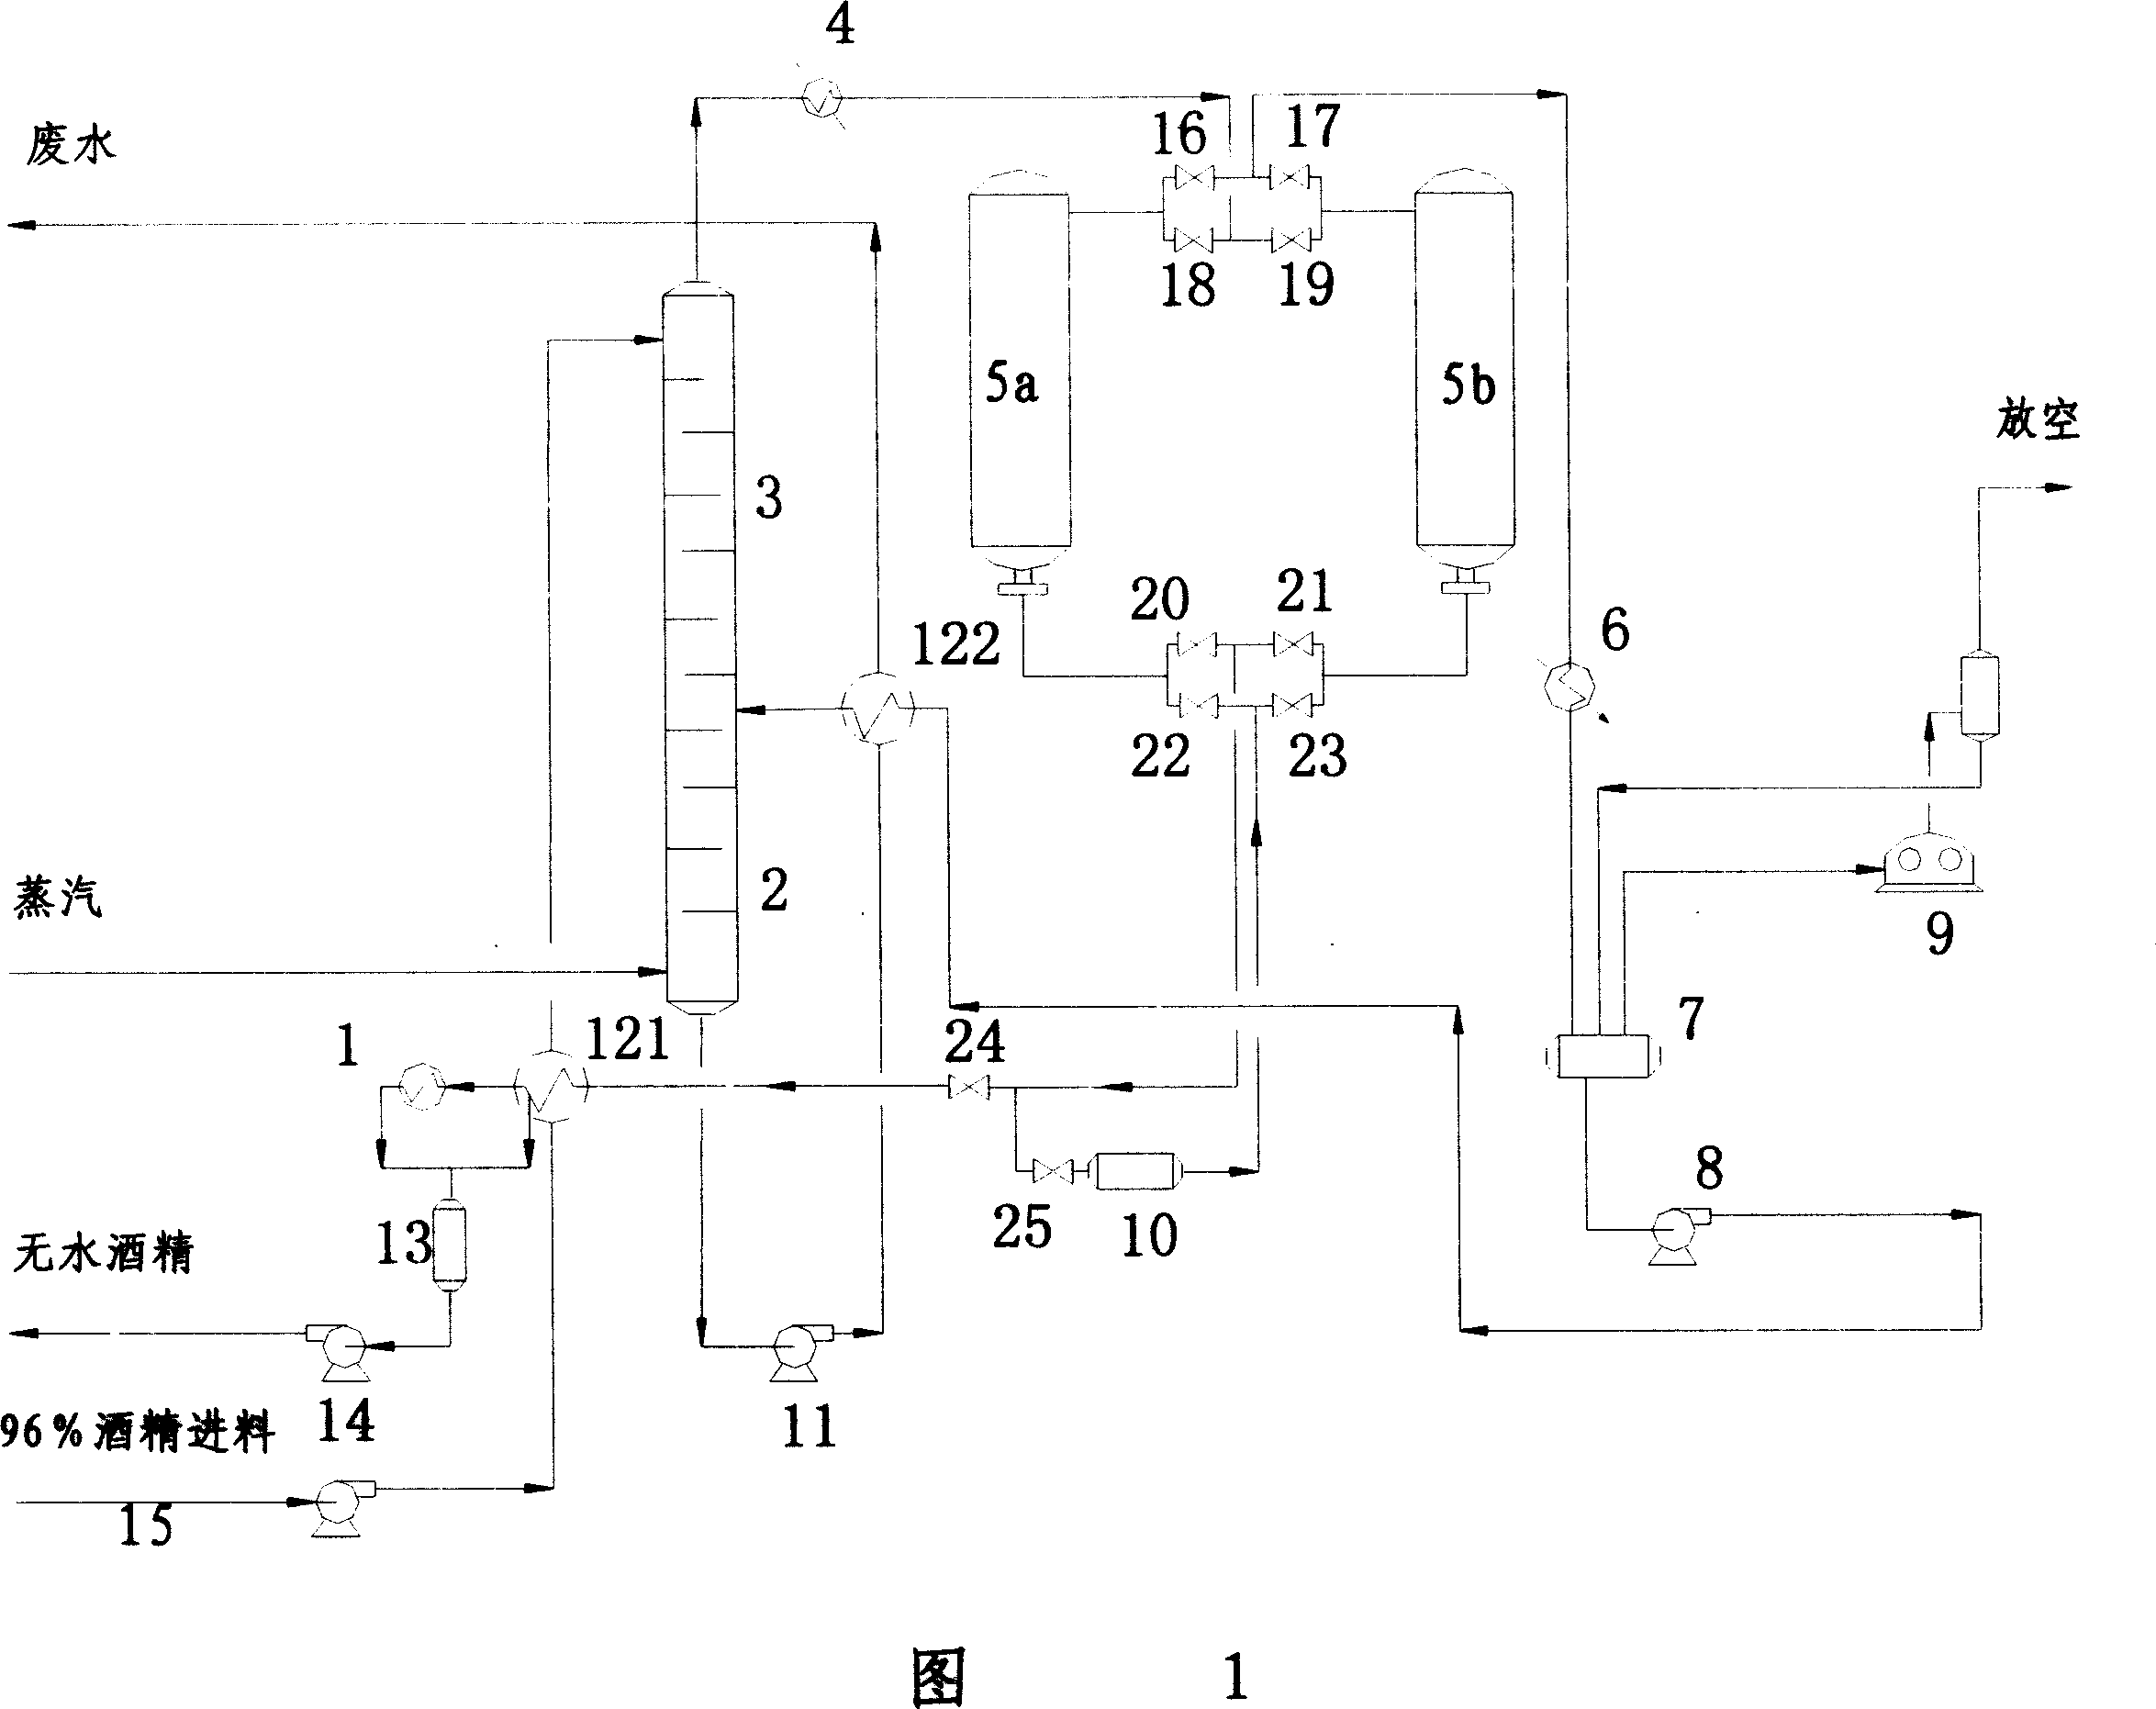 Fuel alcohol dewatering apparatus and process